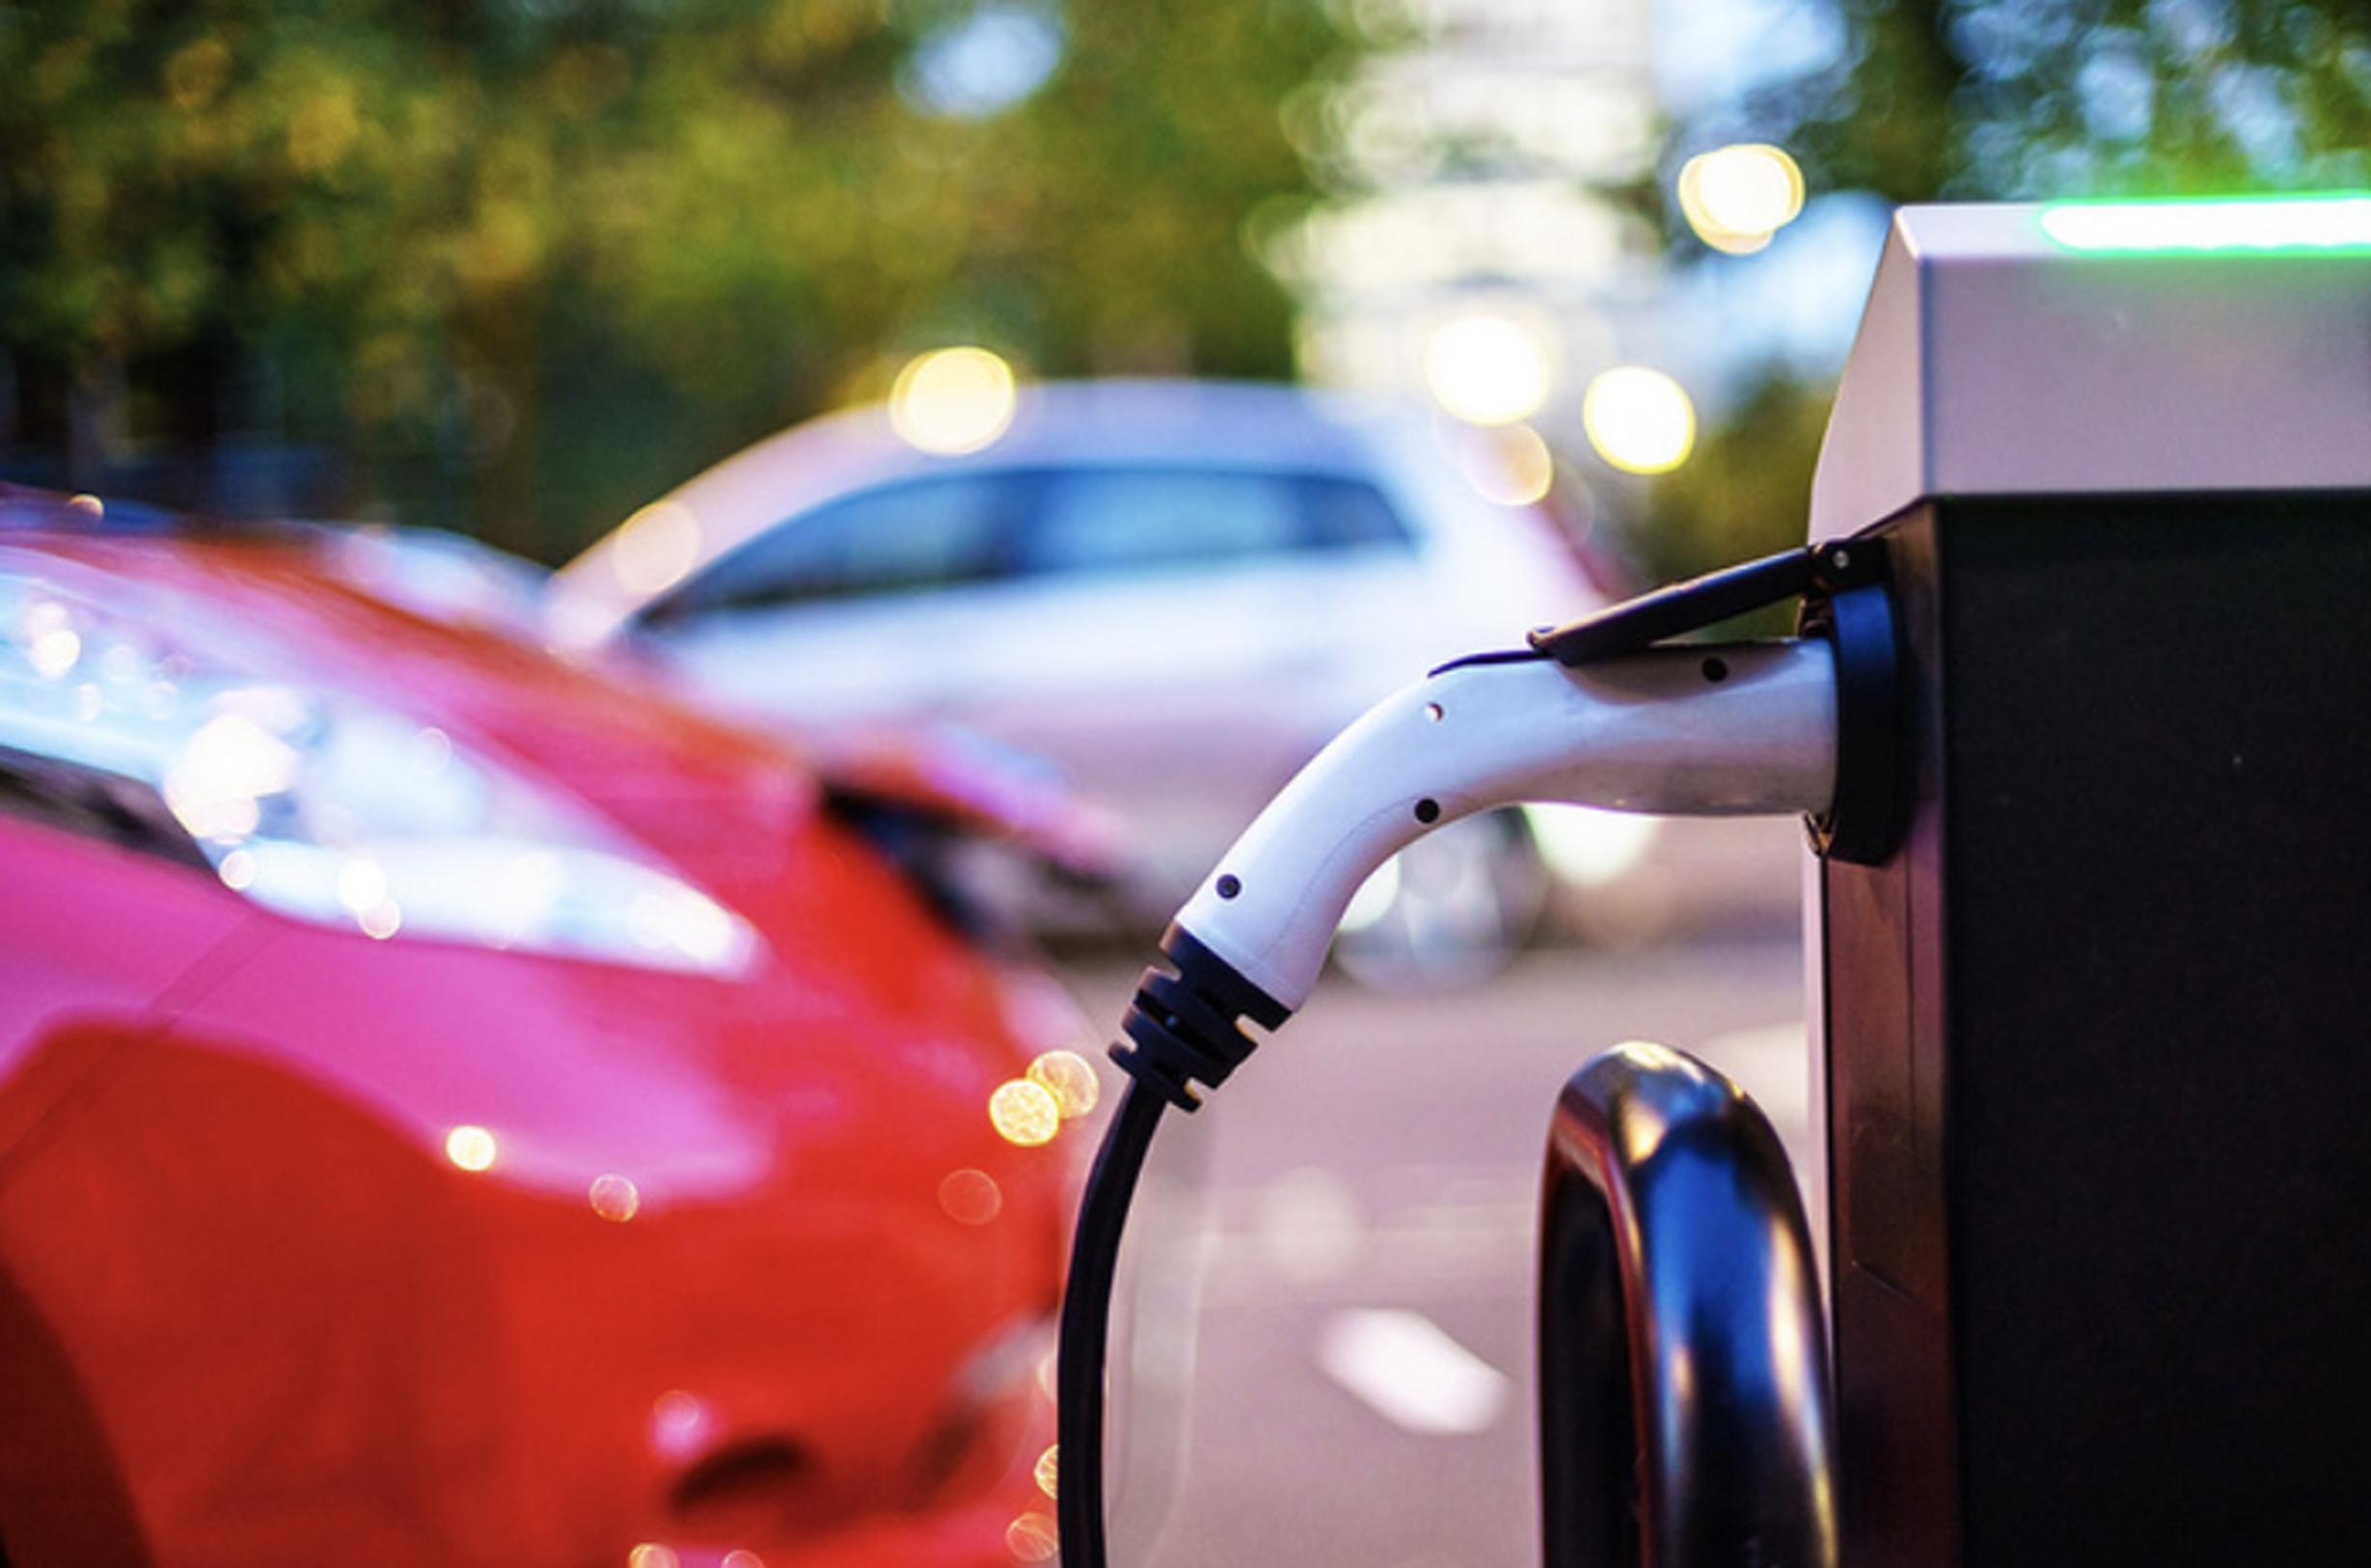 A new grant will provide up to 75% of the cost to buy and install chargepoints, up to £2,500 per socket, up from the previous £350